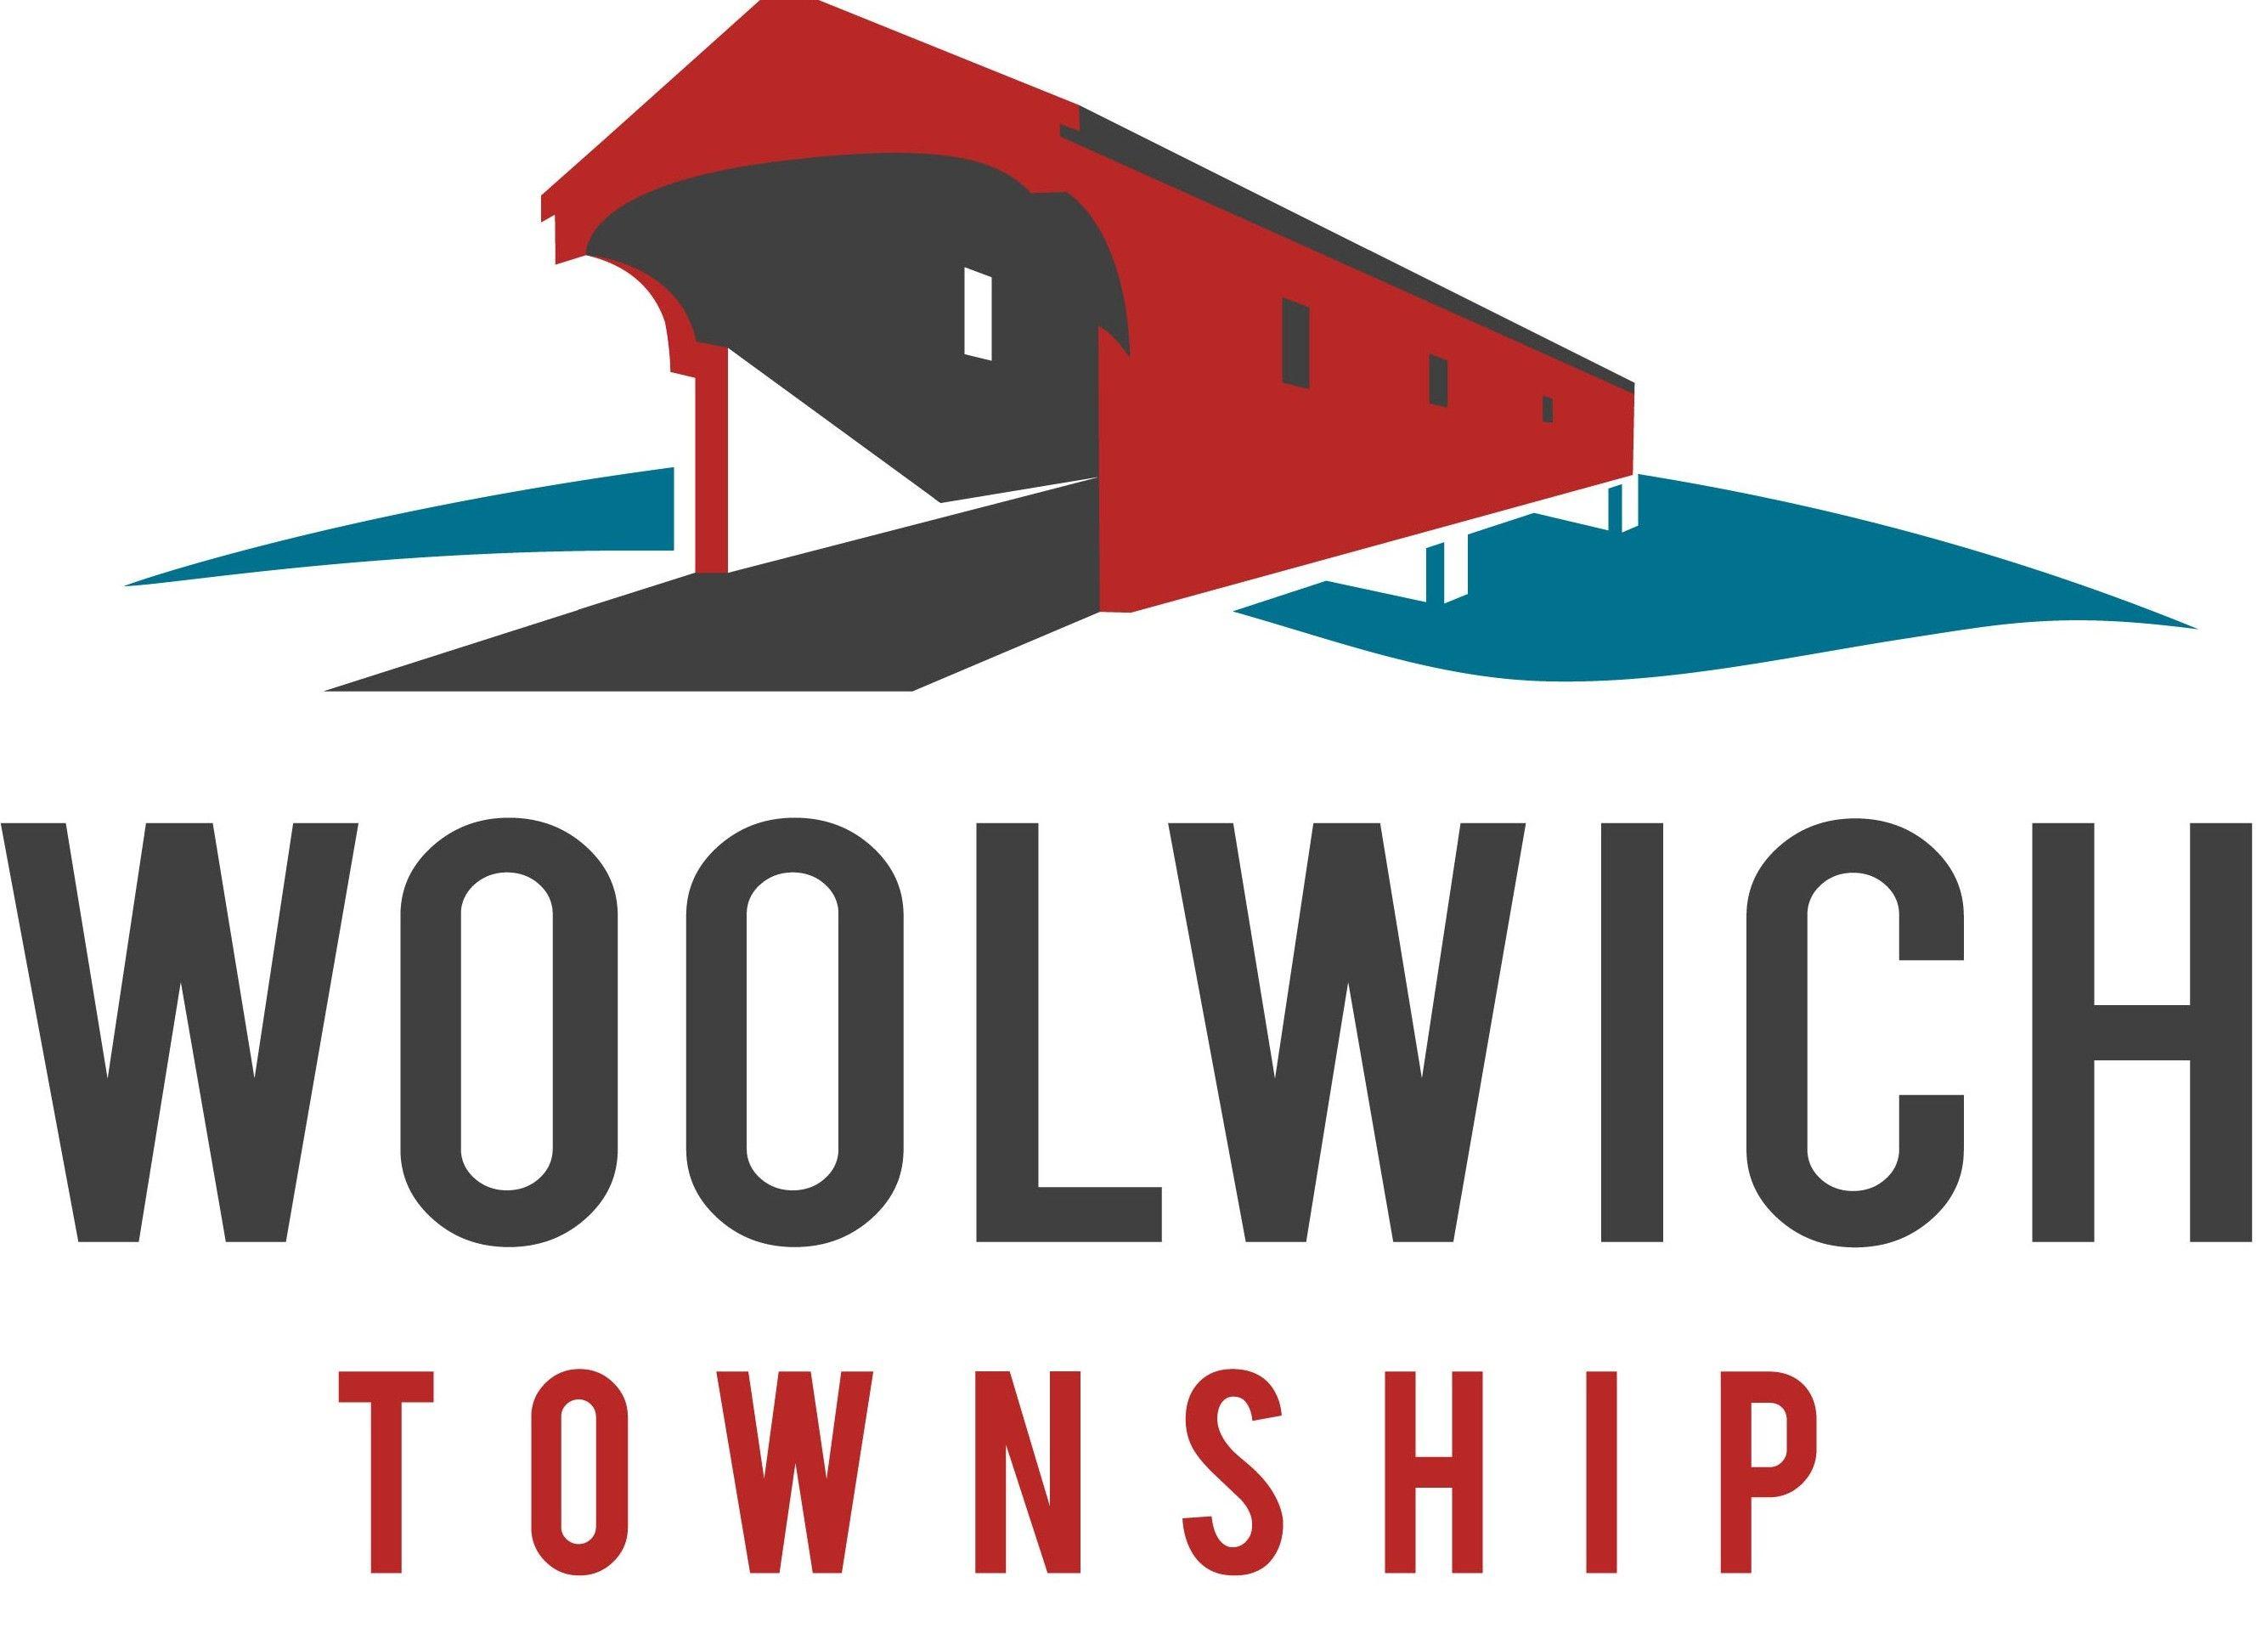 Township Logo - Woolwich Township new logo